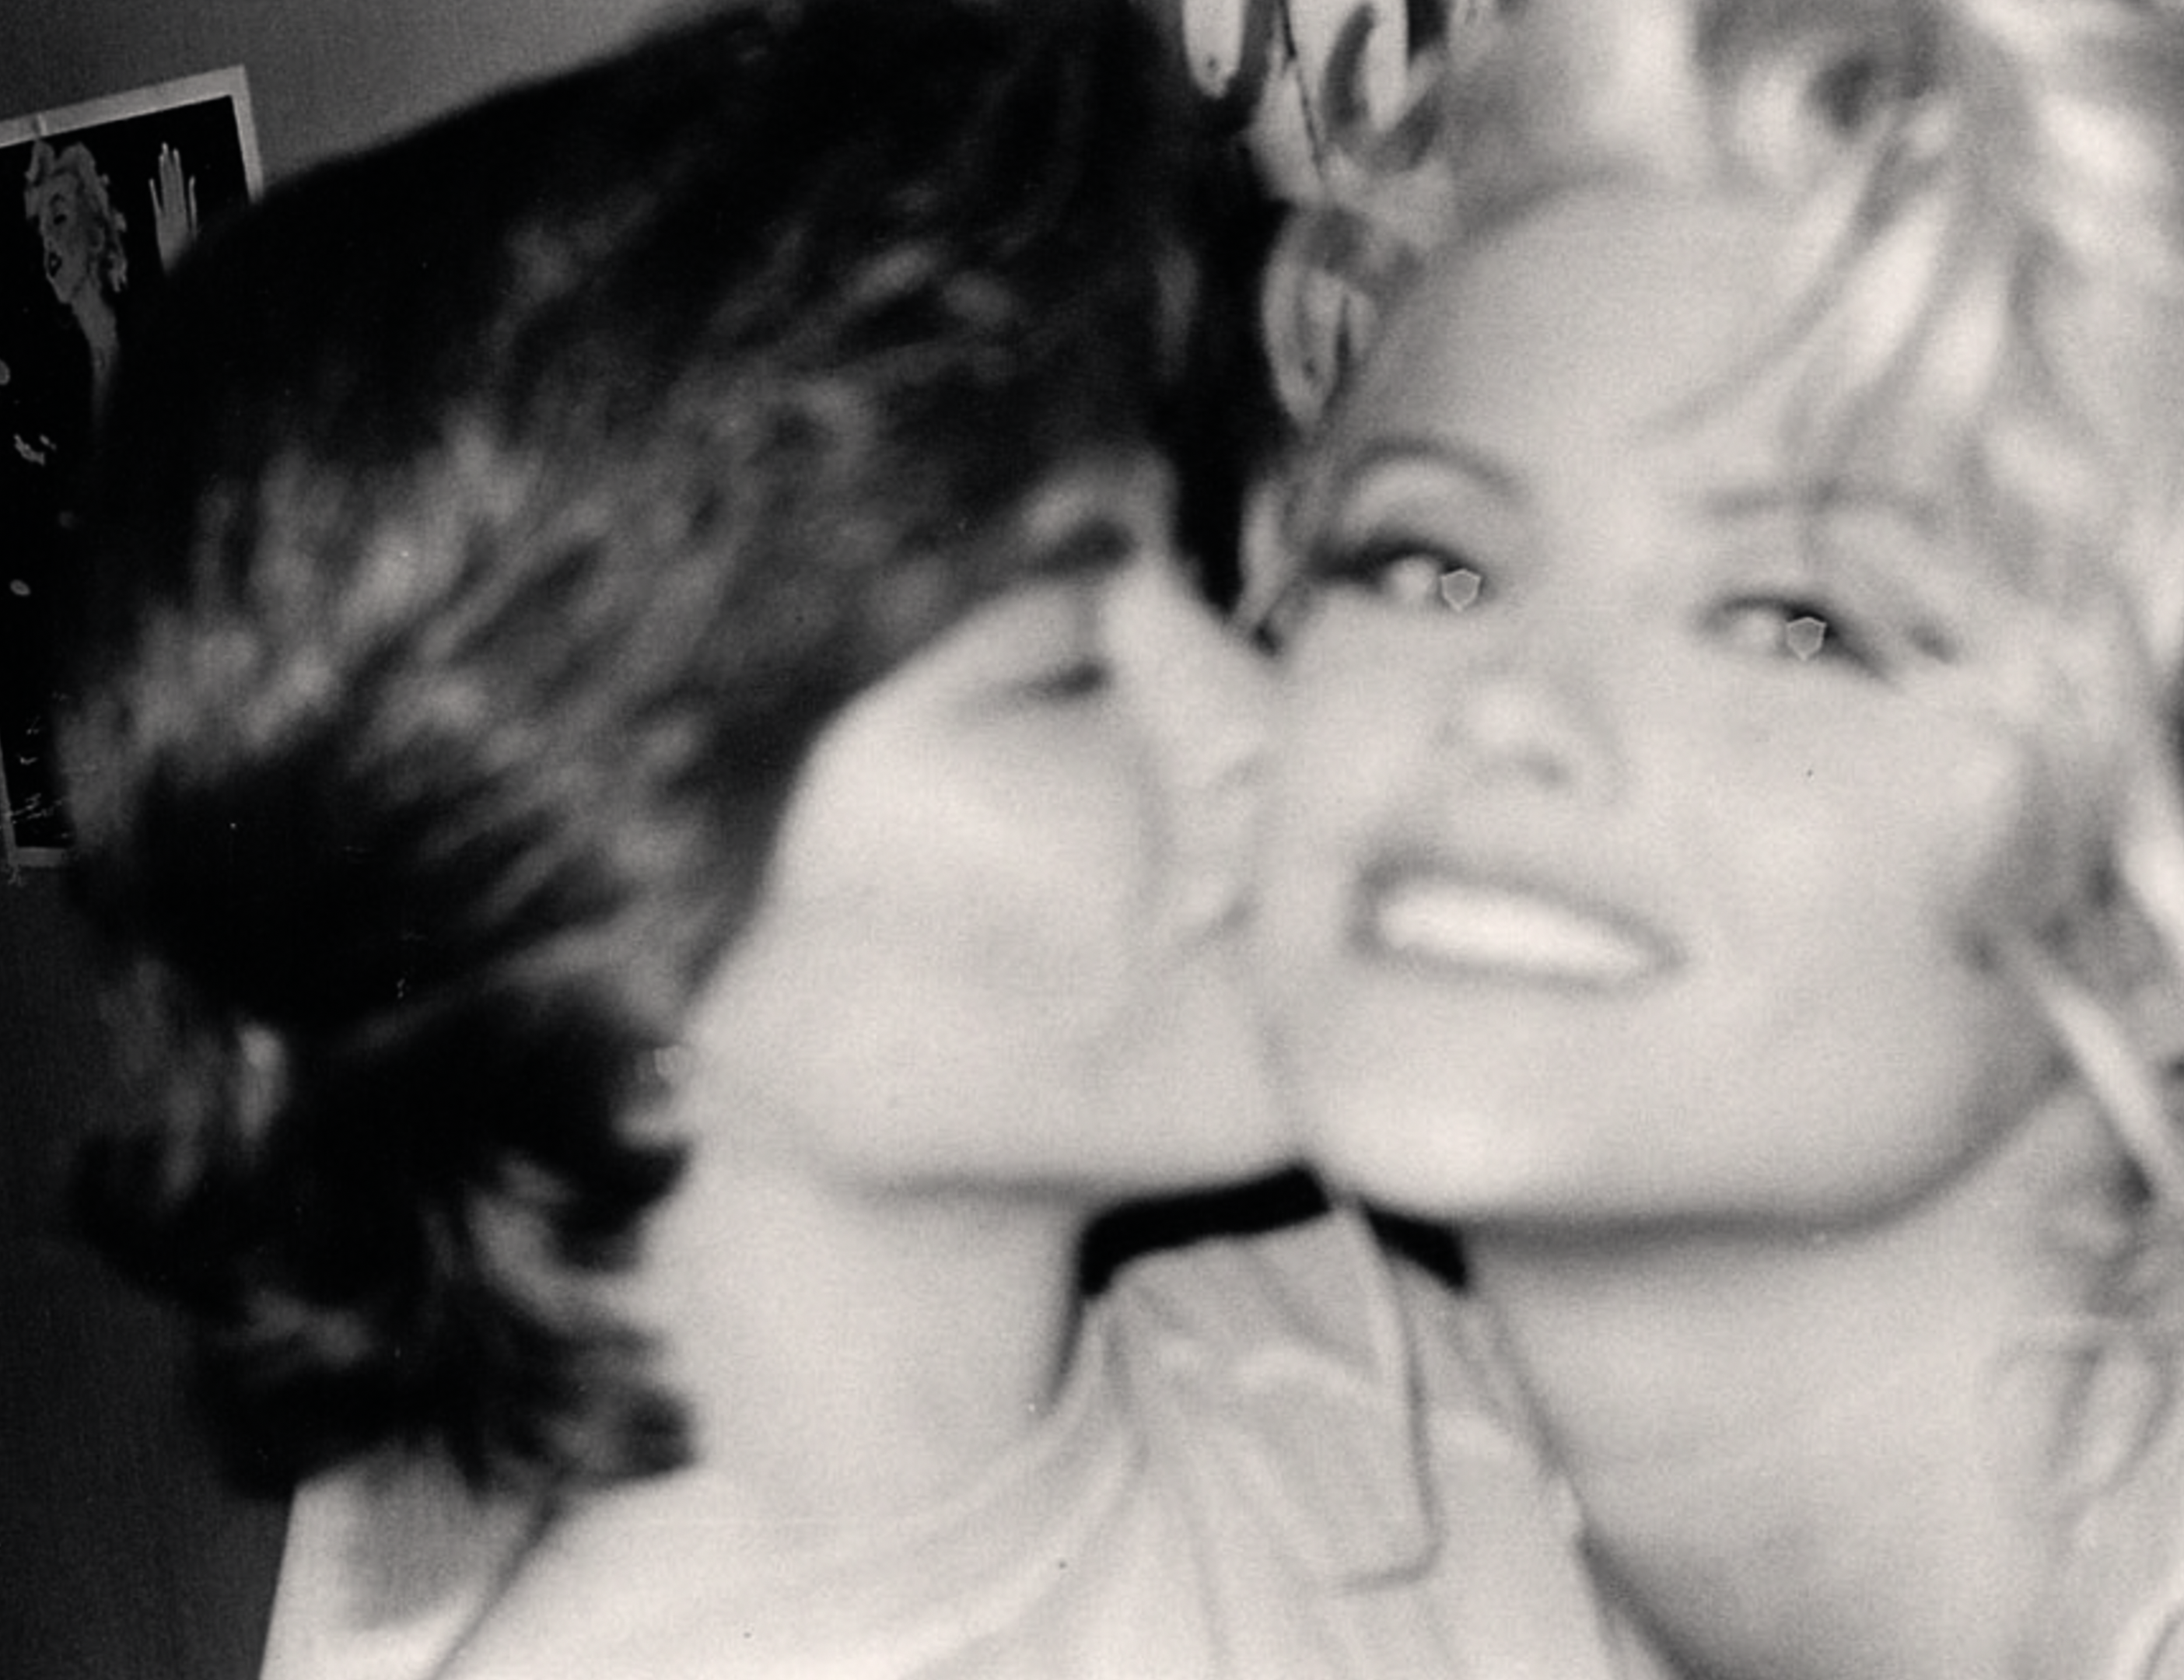 An old photograph of Melissa ‘Missy’ Byrum and Anna Nicole Smith